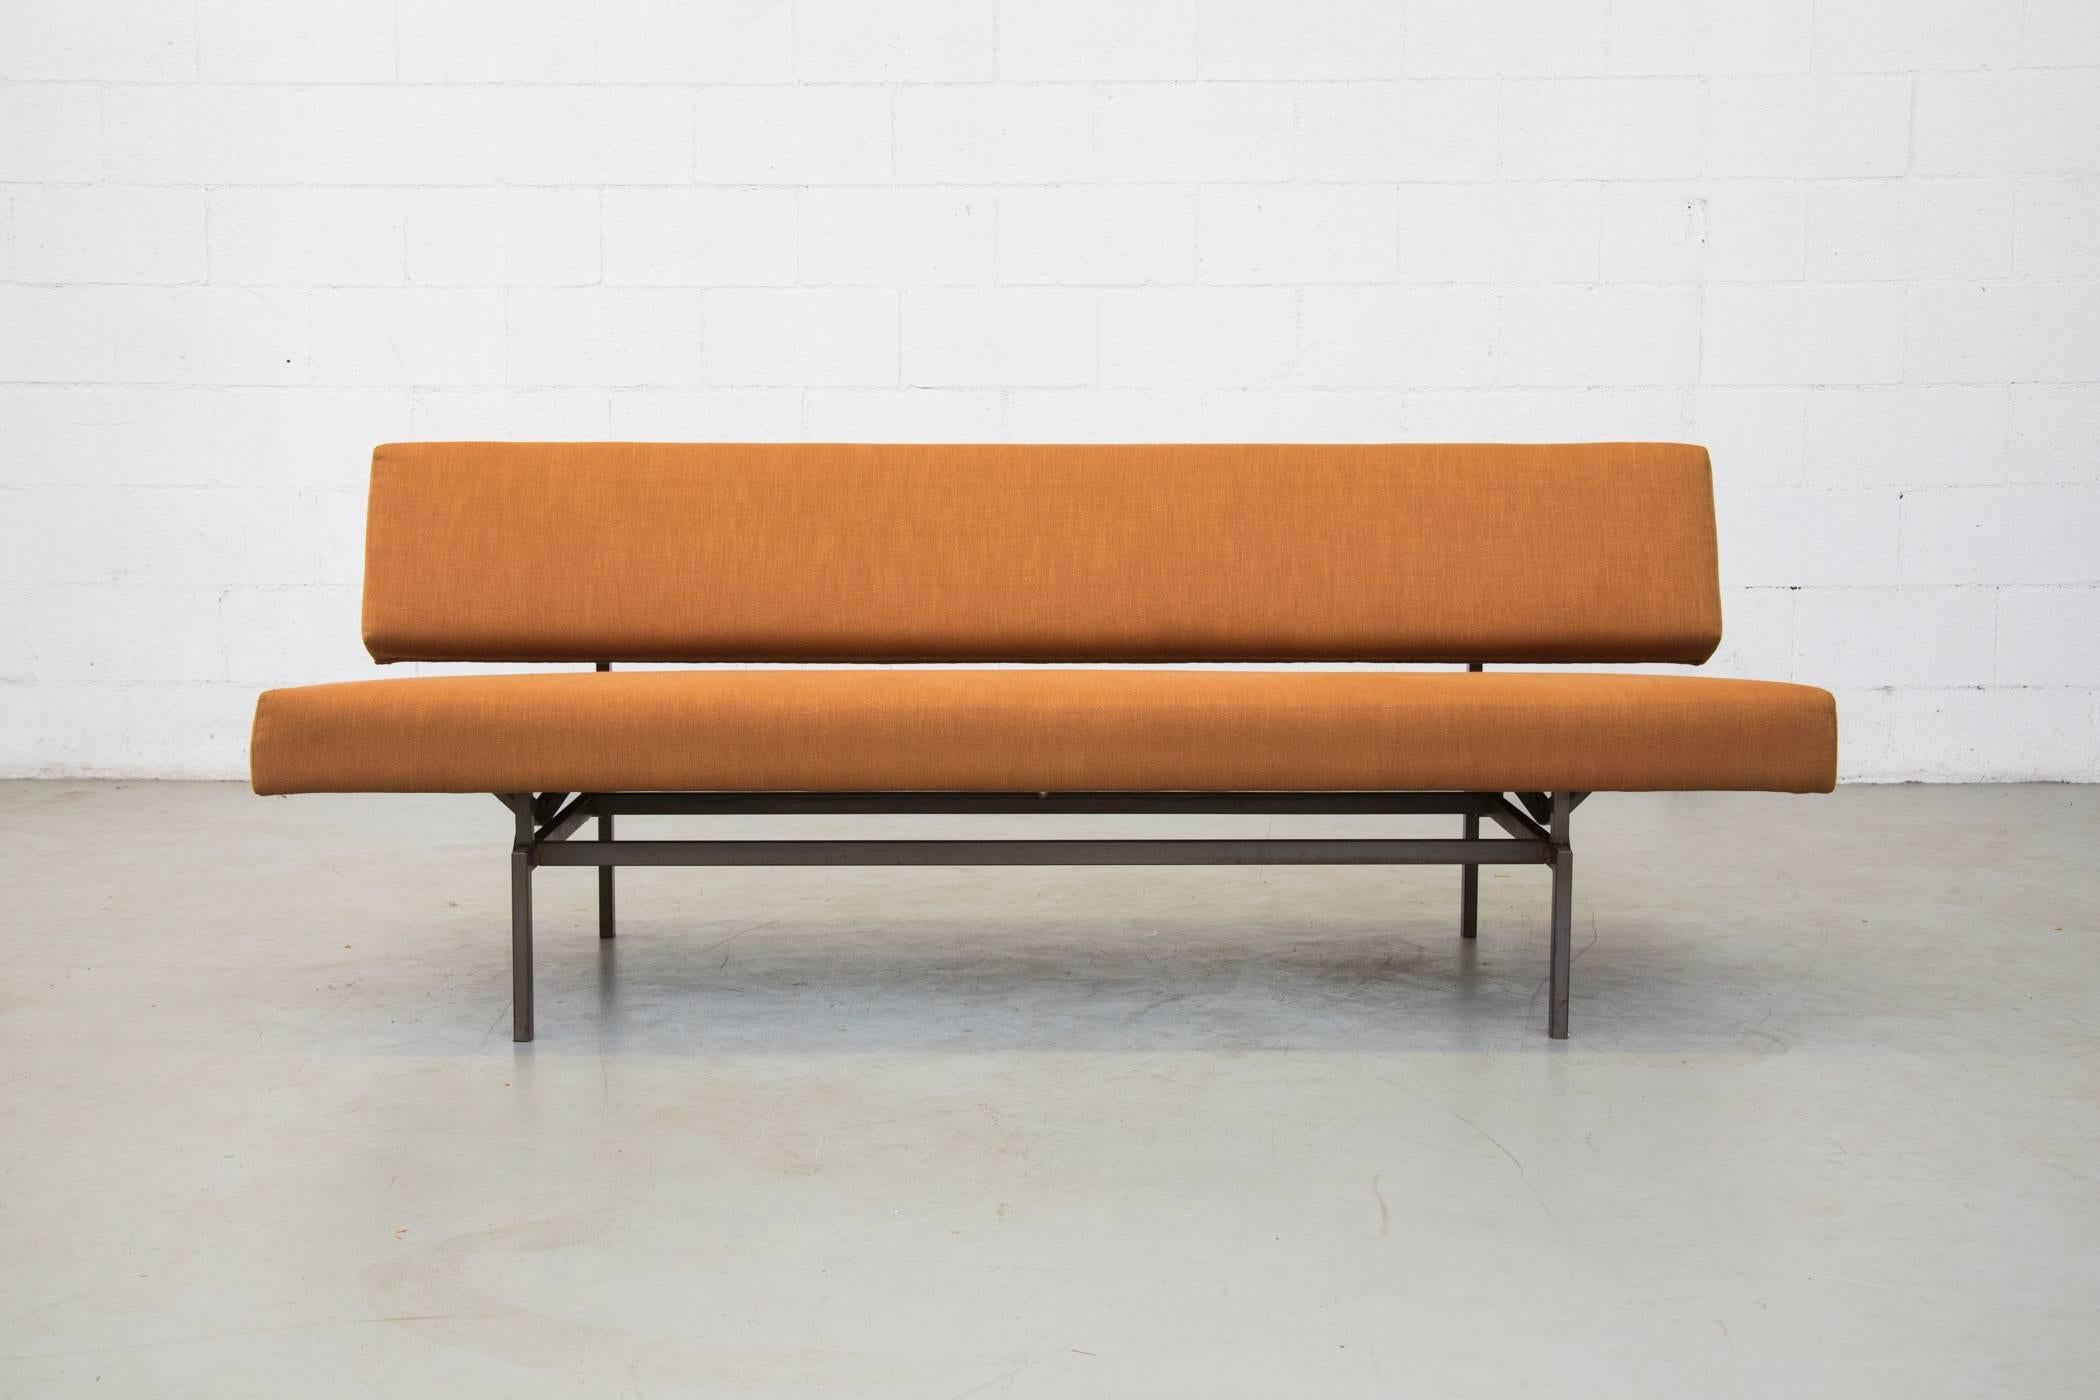 Newly upholstered in light rust colored fabric with original grey steel tubular framed sleeper sofa newly. The seat pulls forward to transform the sofa into a single sleeping bed. Frame in very original condition.